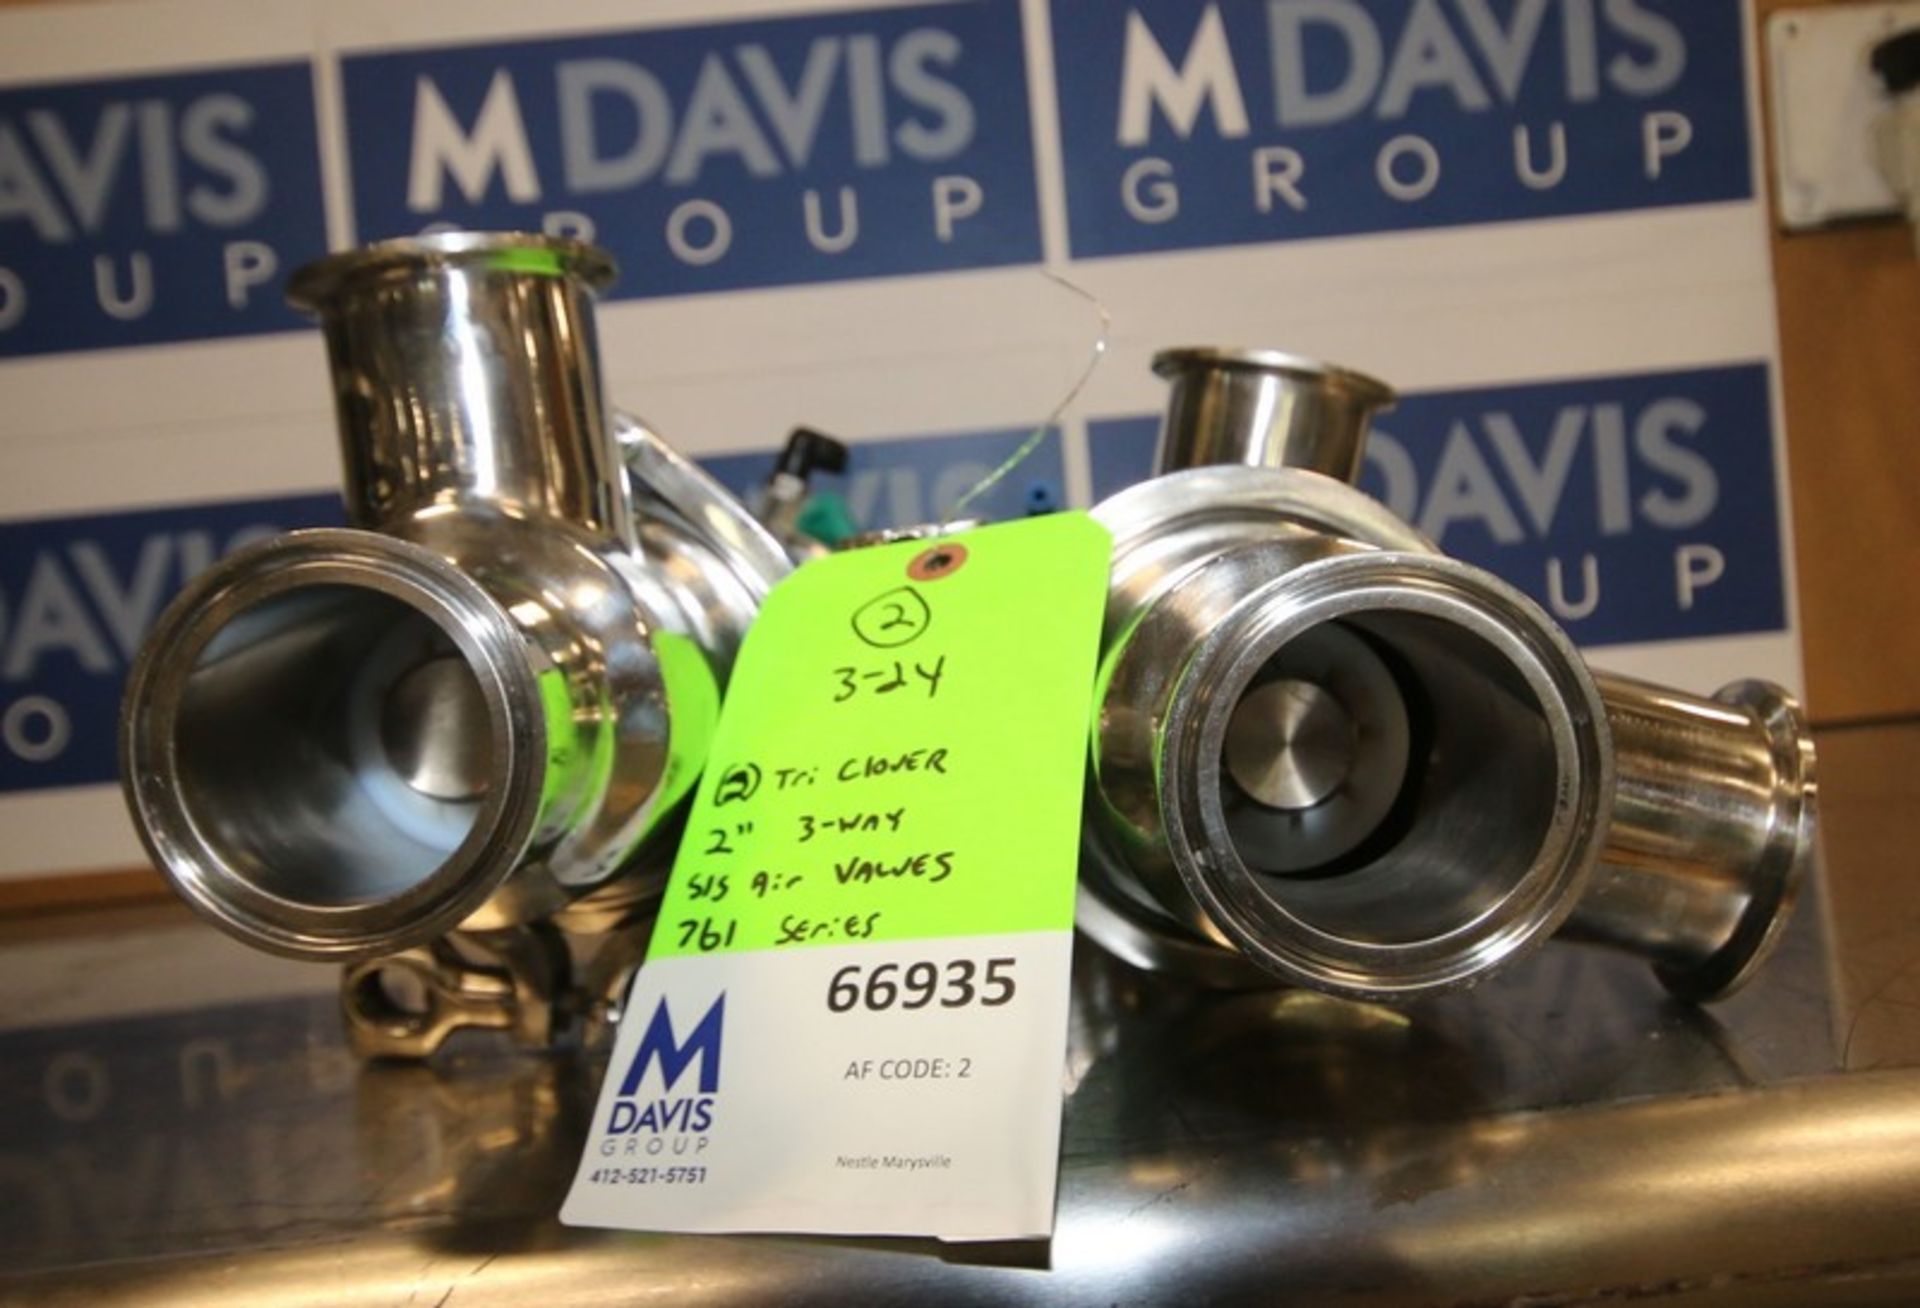 Lot of (2) Tri Clover 2" 3-Way Long Stem S/S Air Valves, Model 761, Clamp Type, with Think Tops ( - Image 4 of 4